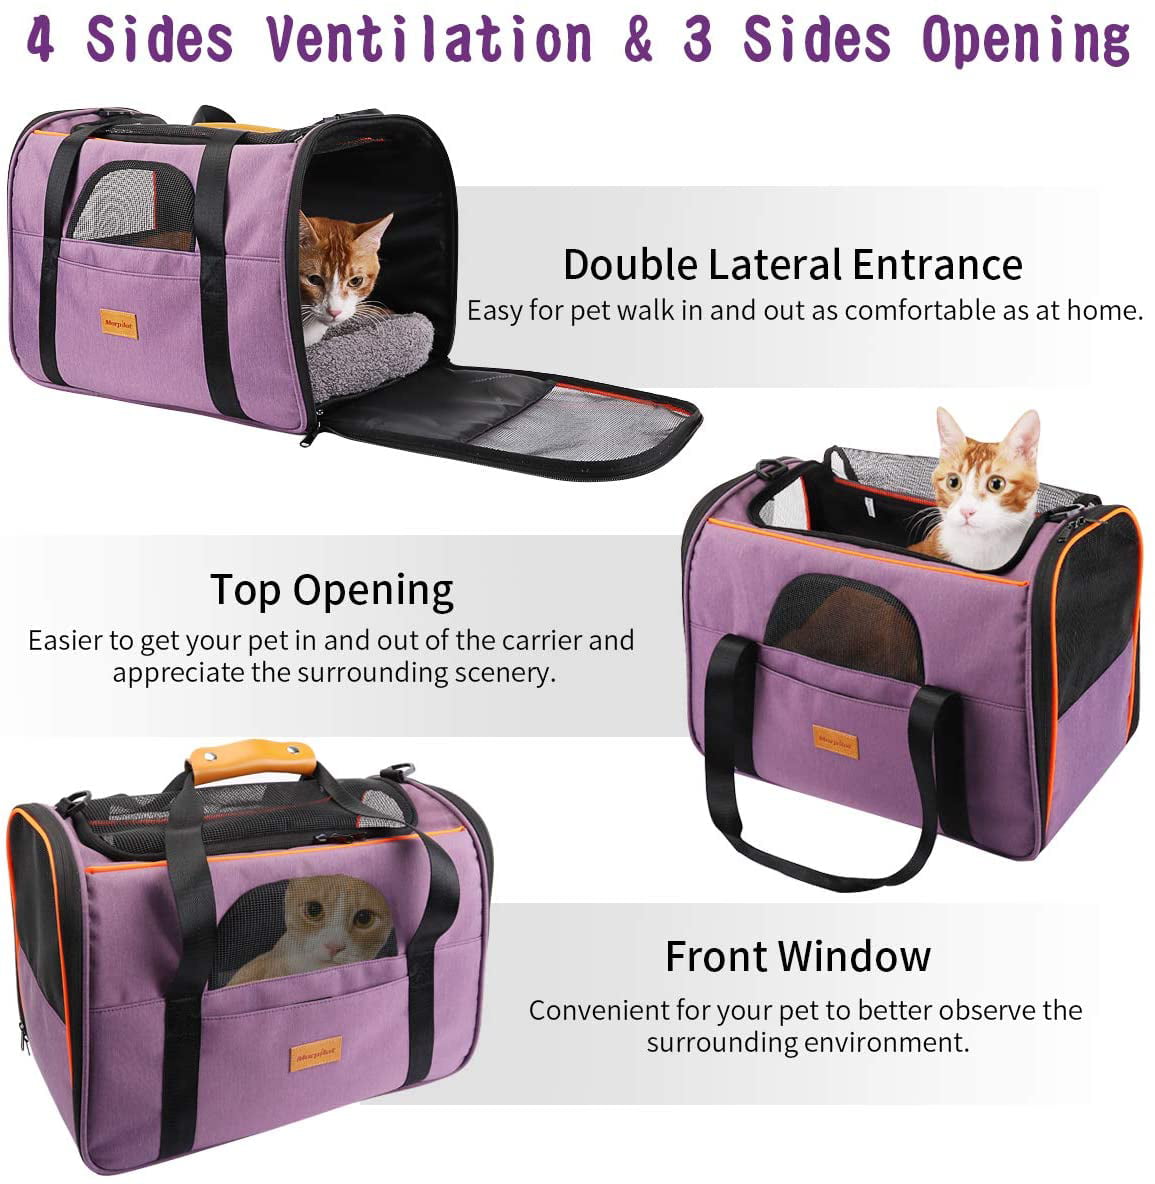 Pet Cage with Locking Safety Zippers Airline Approved Foldable Bowl Folding Fabric Pet Carrier morpilot Pet Travel Carrier Bag Travel Carrier Bag for Dogs or Cats Portable Pet Bag 